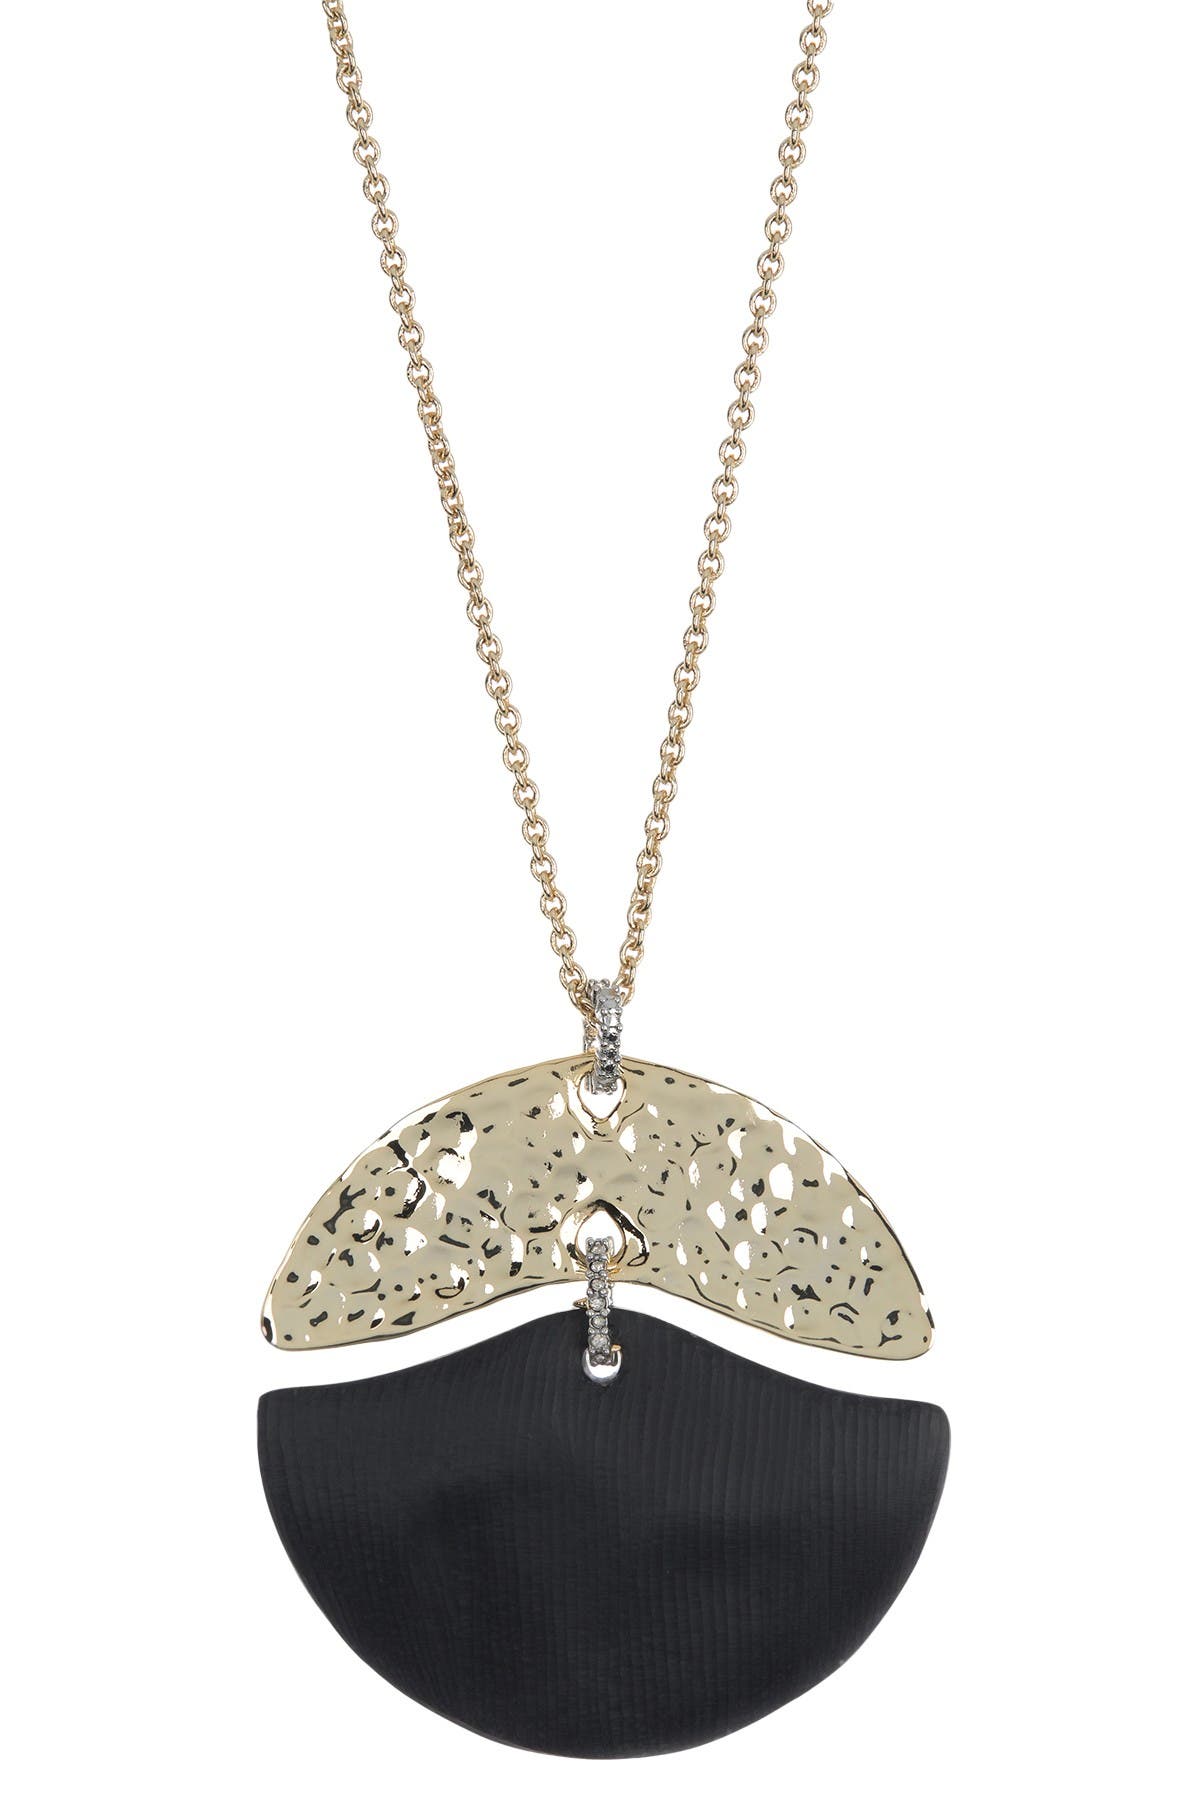 Alexis Bittar Hammered Mobile Pendant Necklace